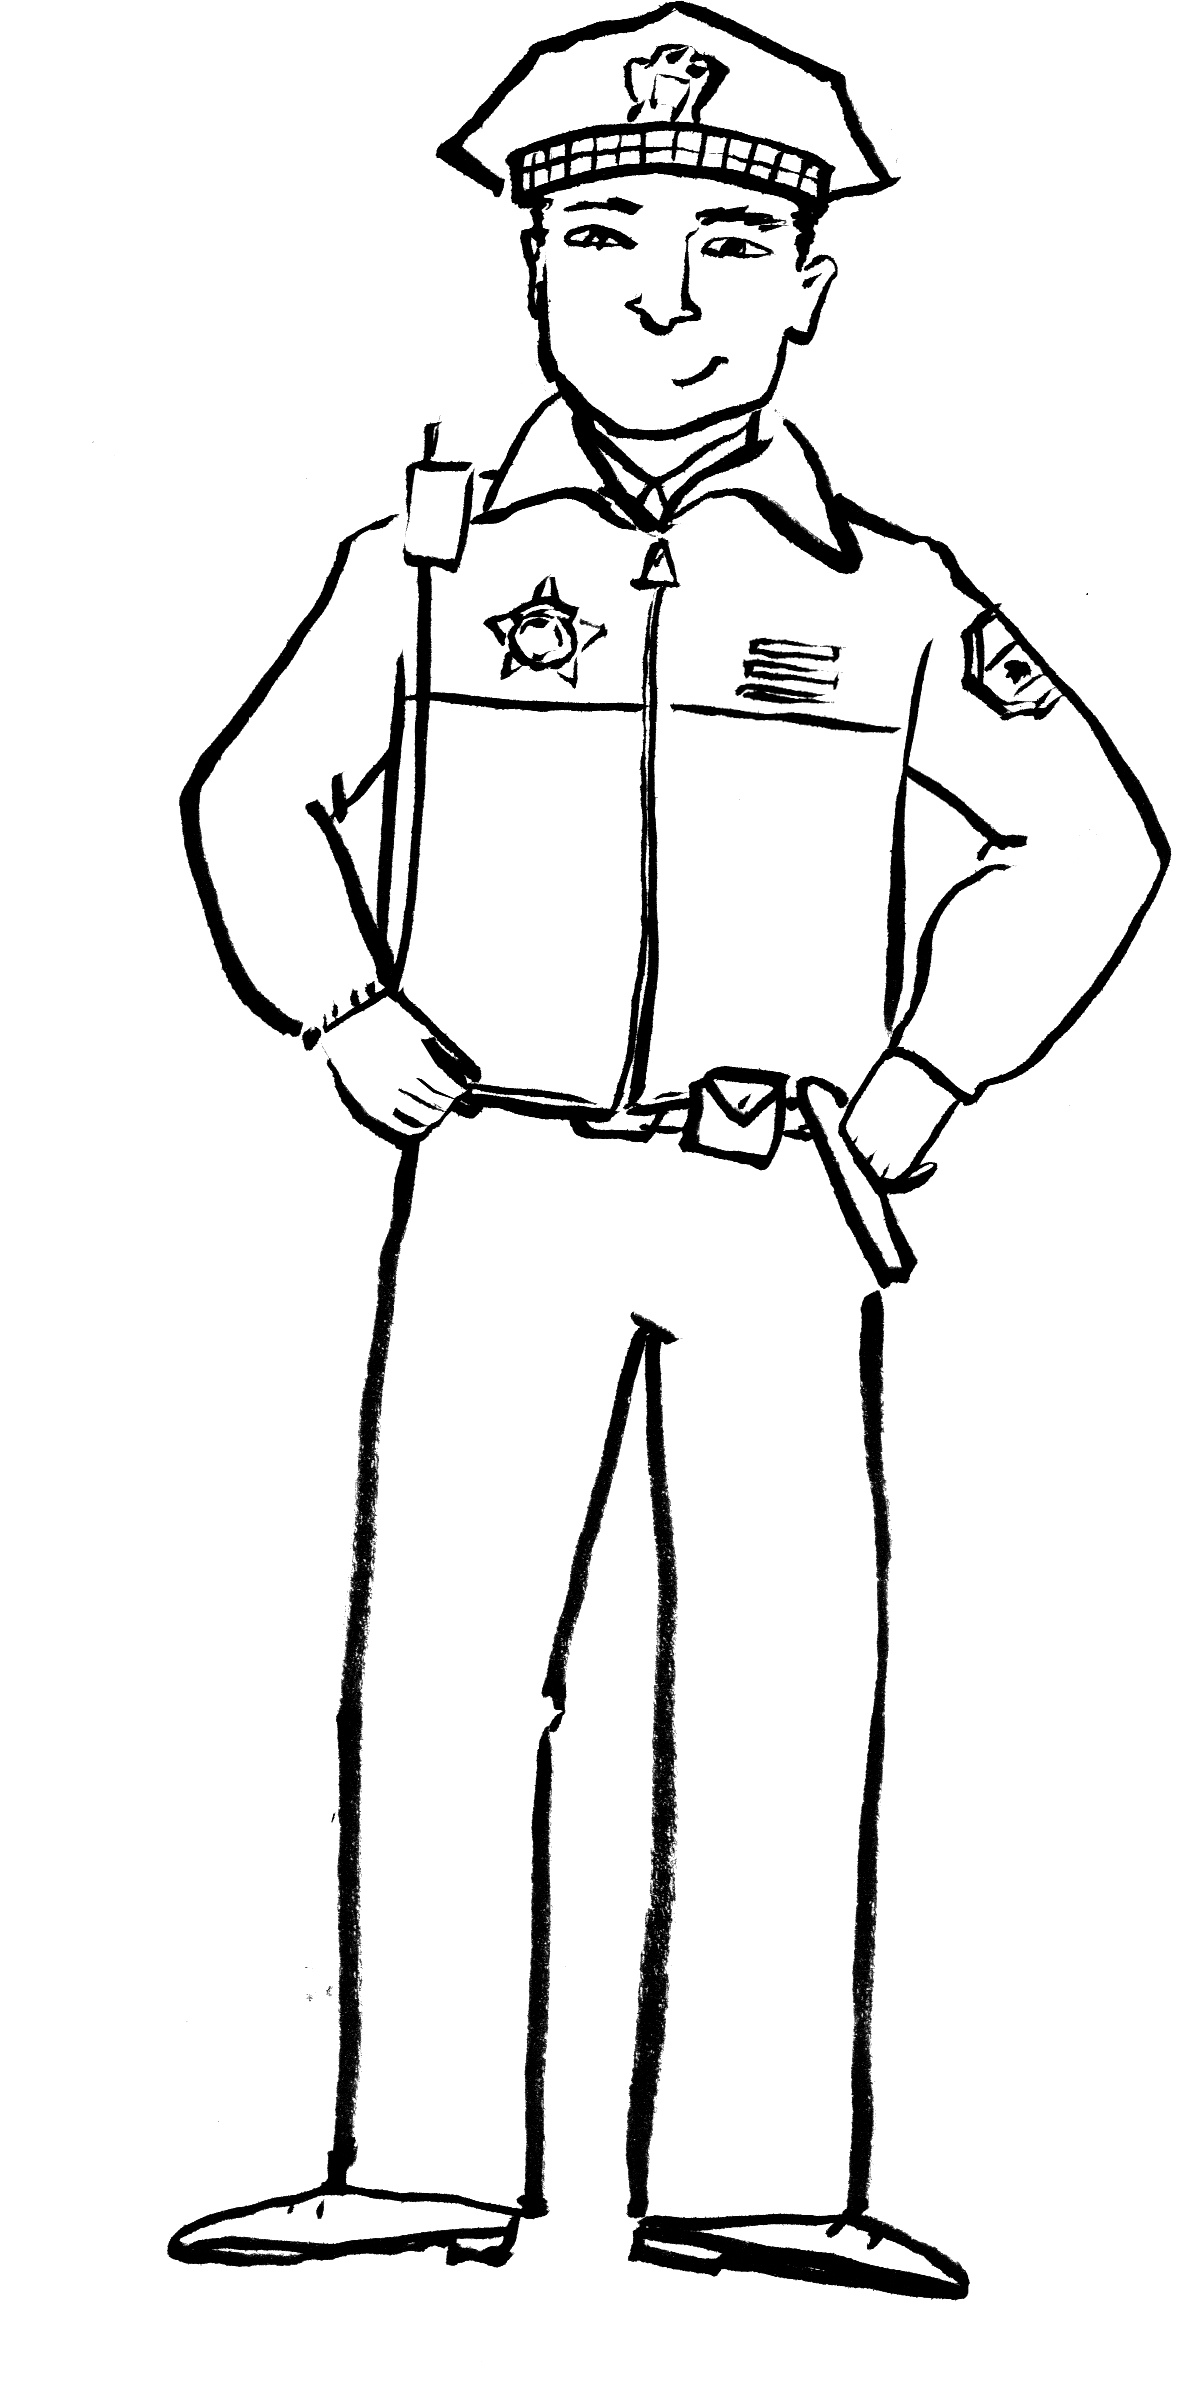 Coloring Pages Of Policemen Printables - Google Twit